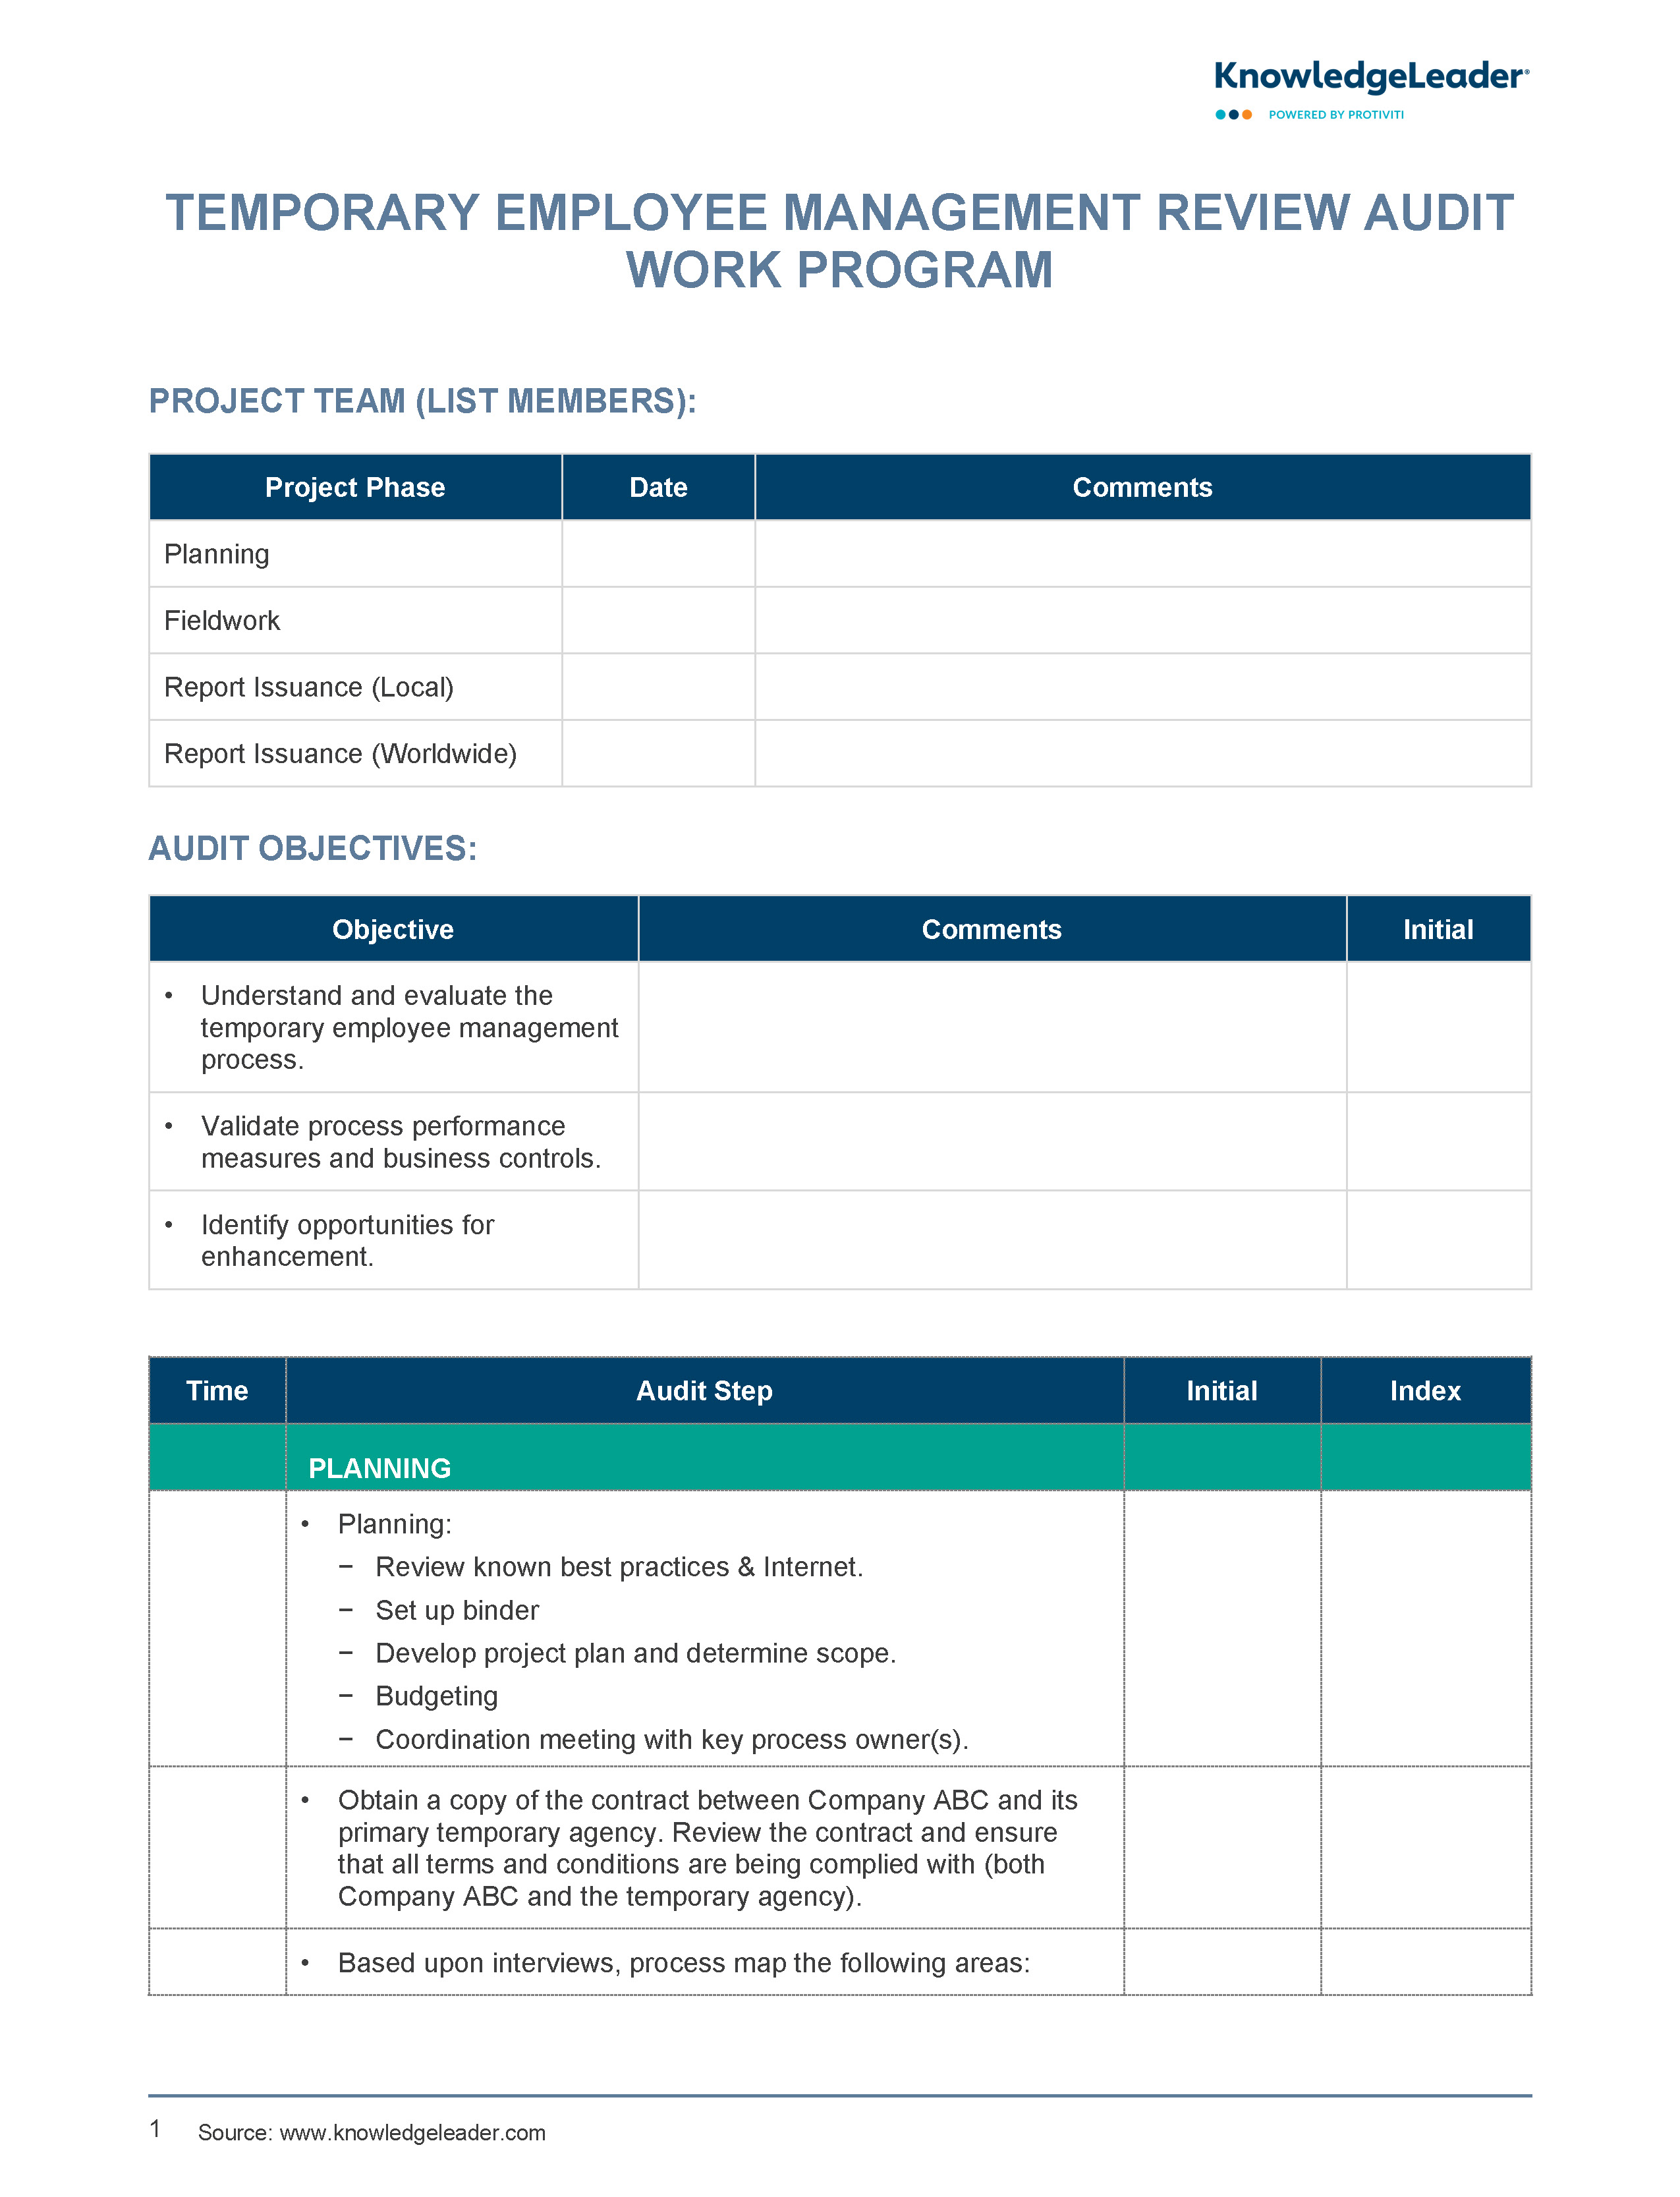 Screenshot of the first page of Temporary Employee Management Review Work Program